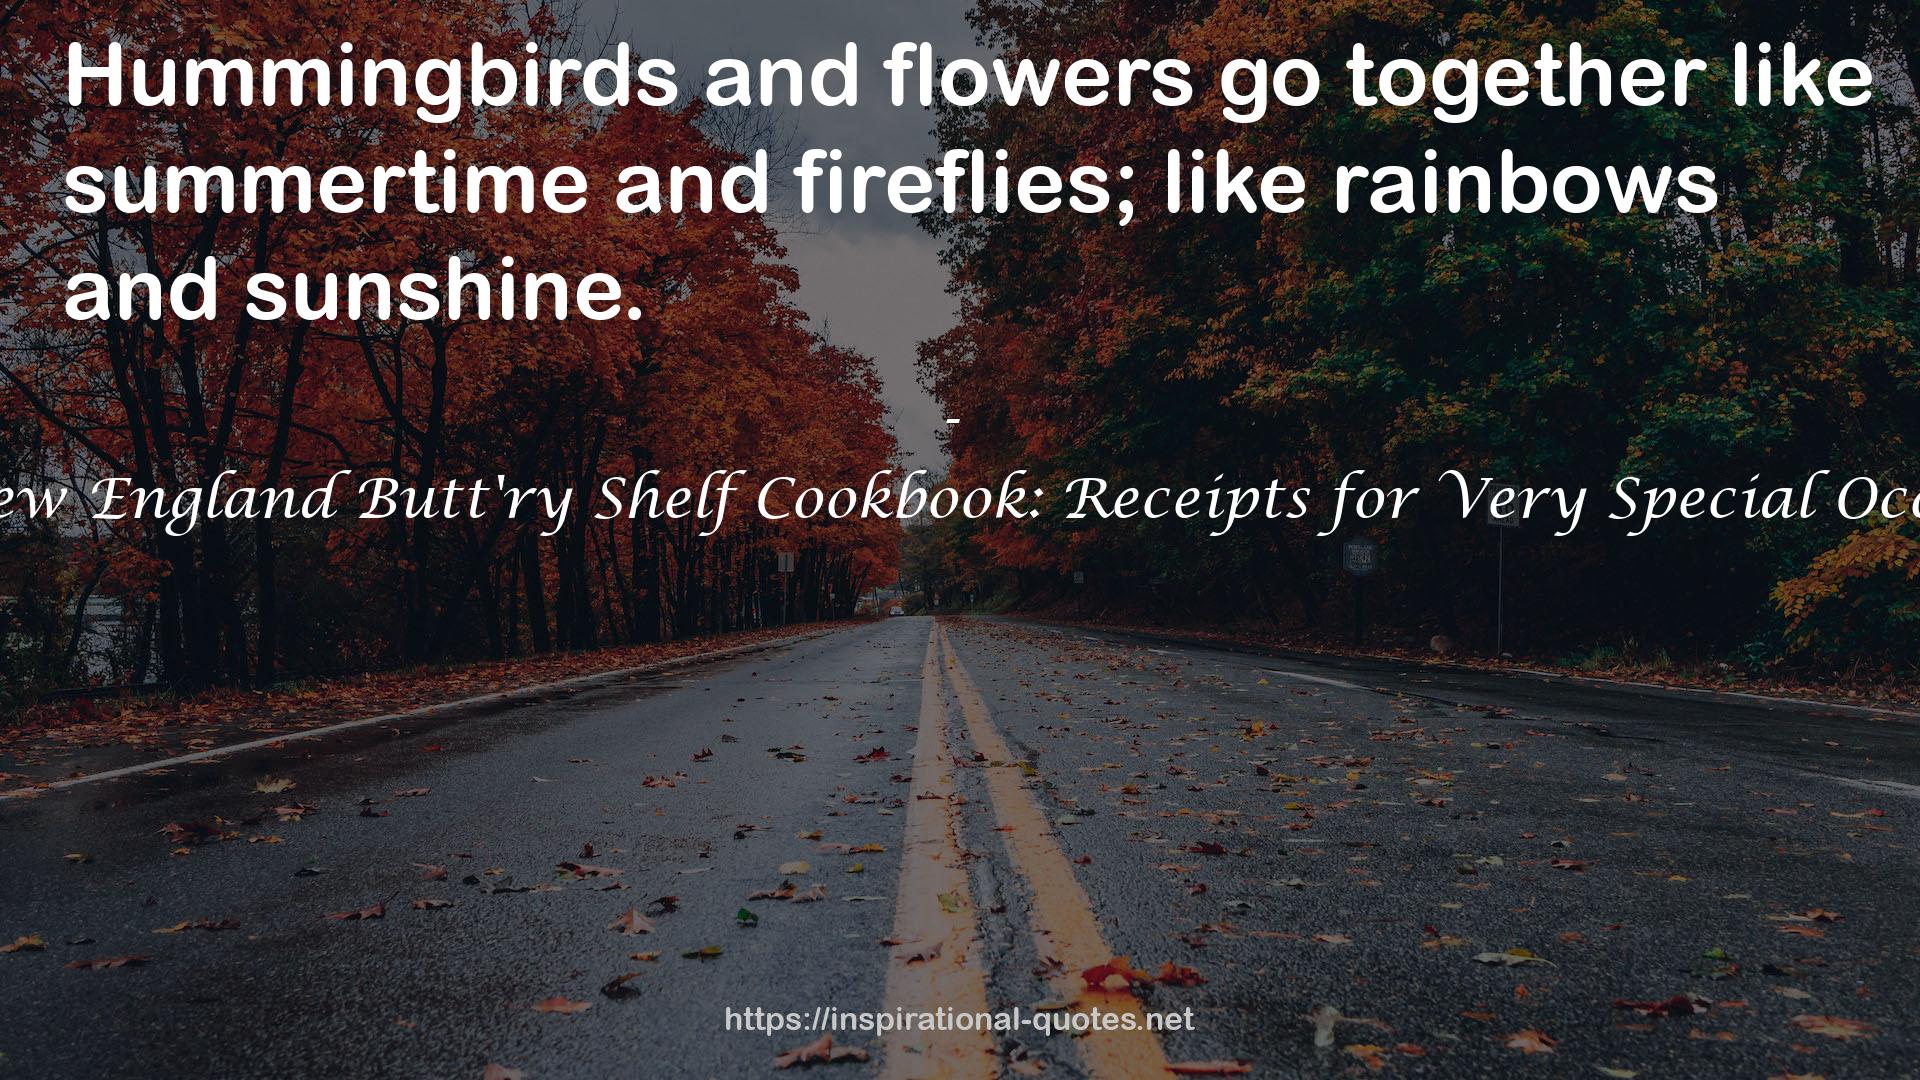 The New England Butt'ry Shelf Cookbook: Receipts for Very Special Occasions QUOTES